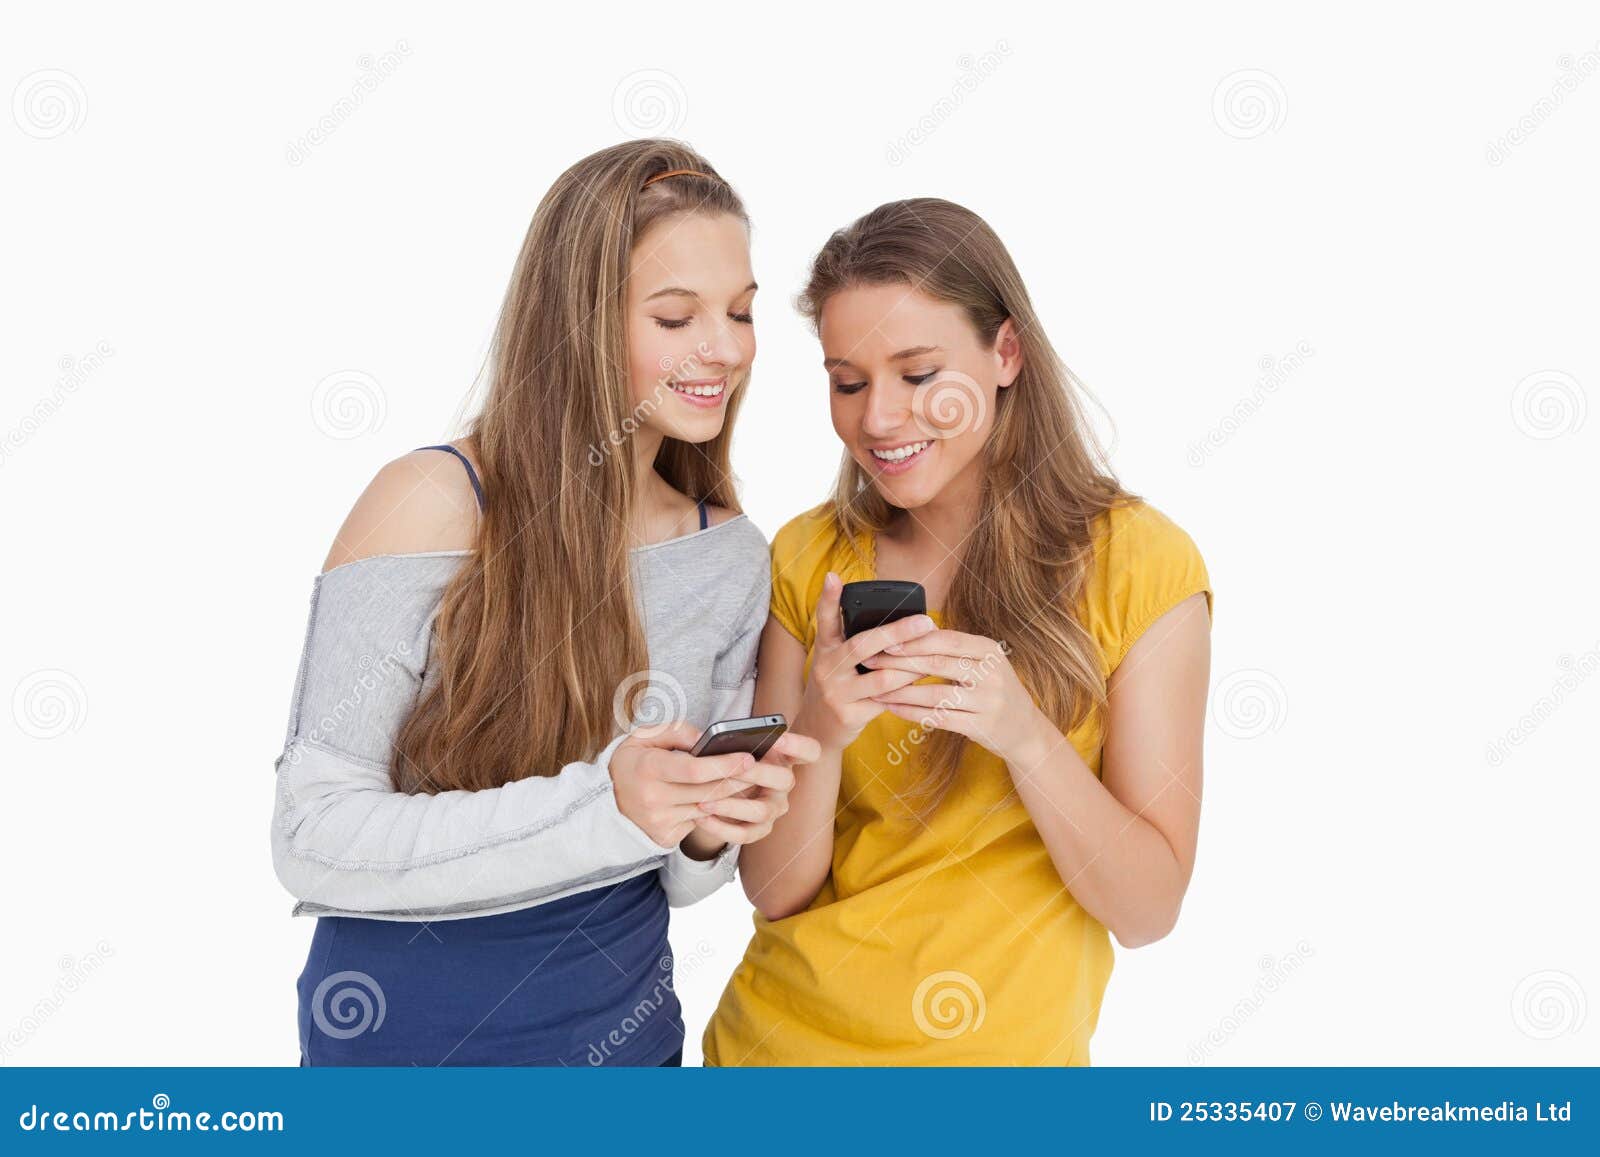 Two Young Women Smiling while Looking Their Cellphones Stock Image ...